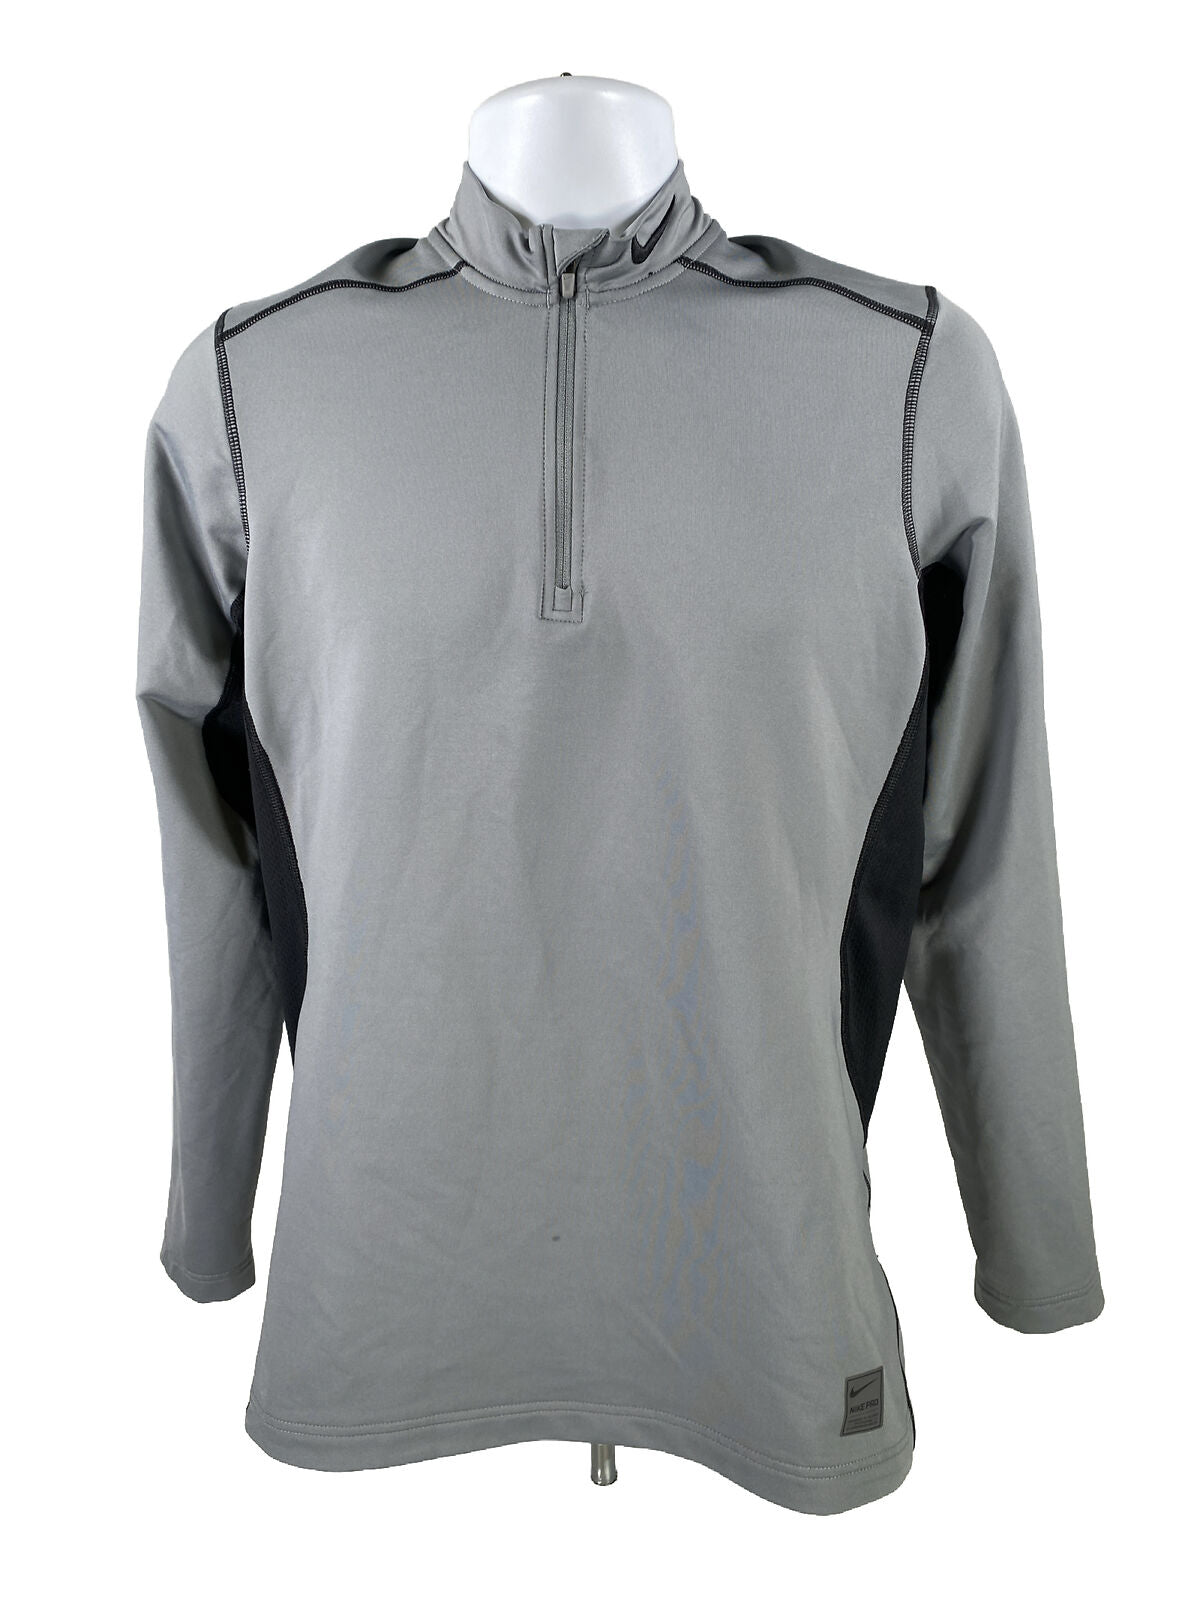 Nike Men's Pro Gray 1/2 Zip Long Sleeve Fitted Athletic Shirt - M